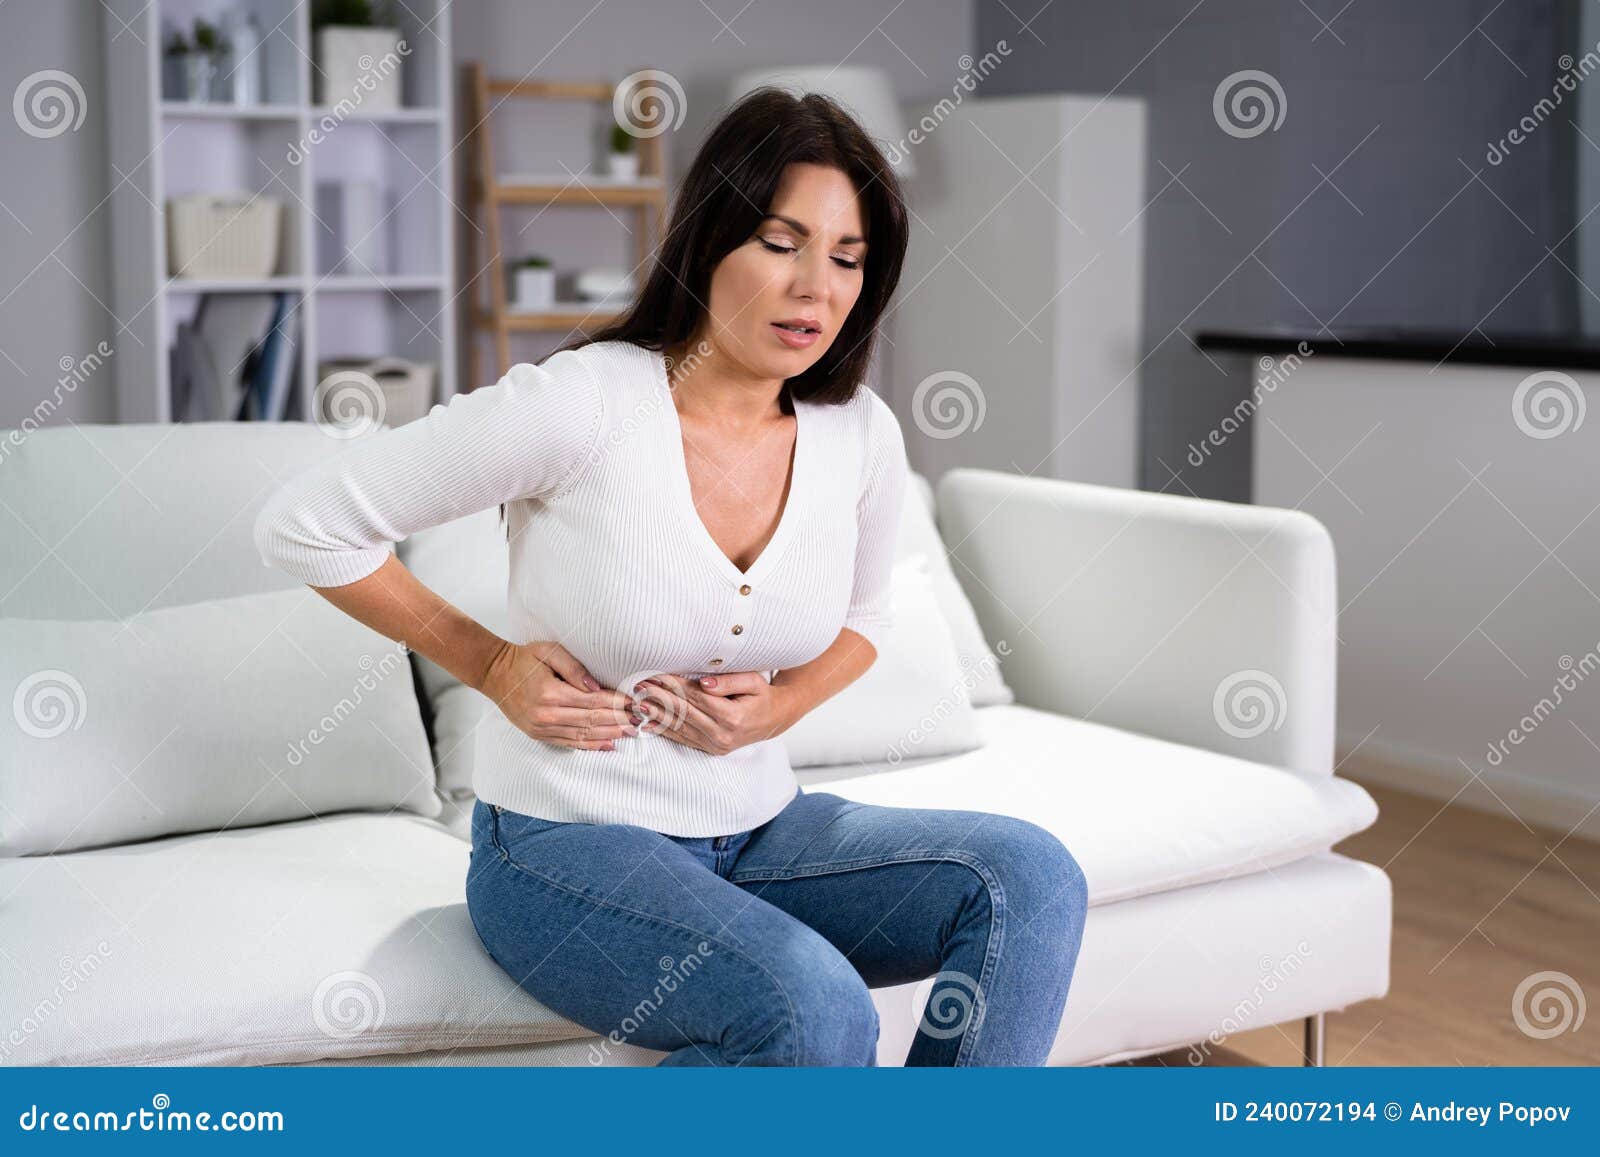 abdominal liver pain and cramp